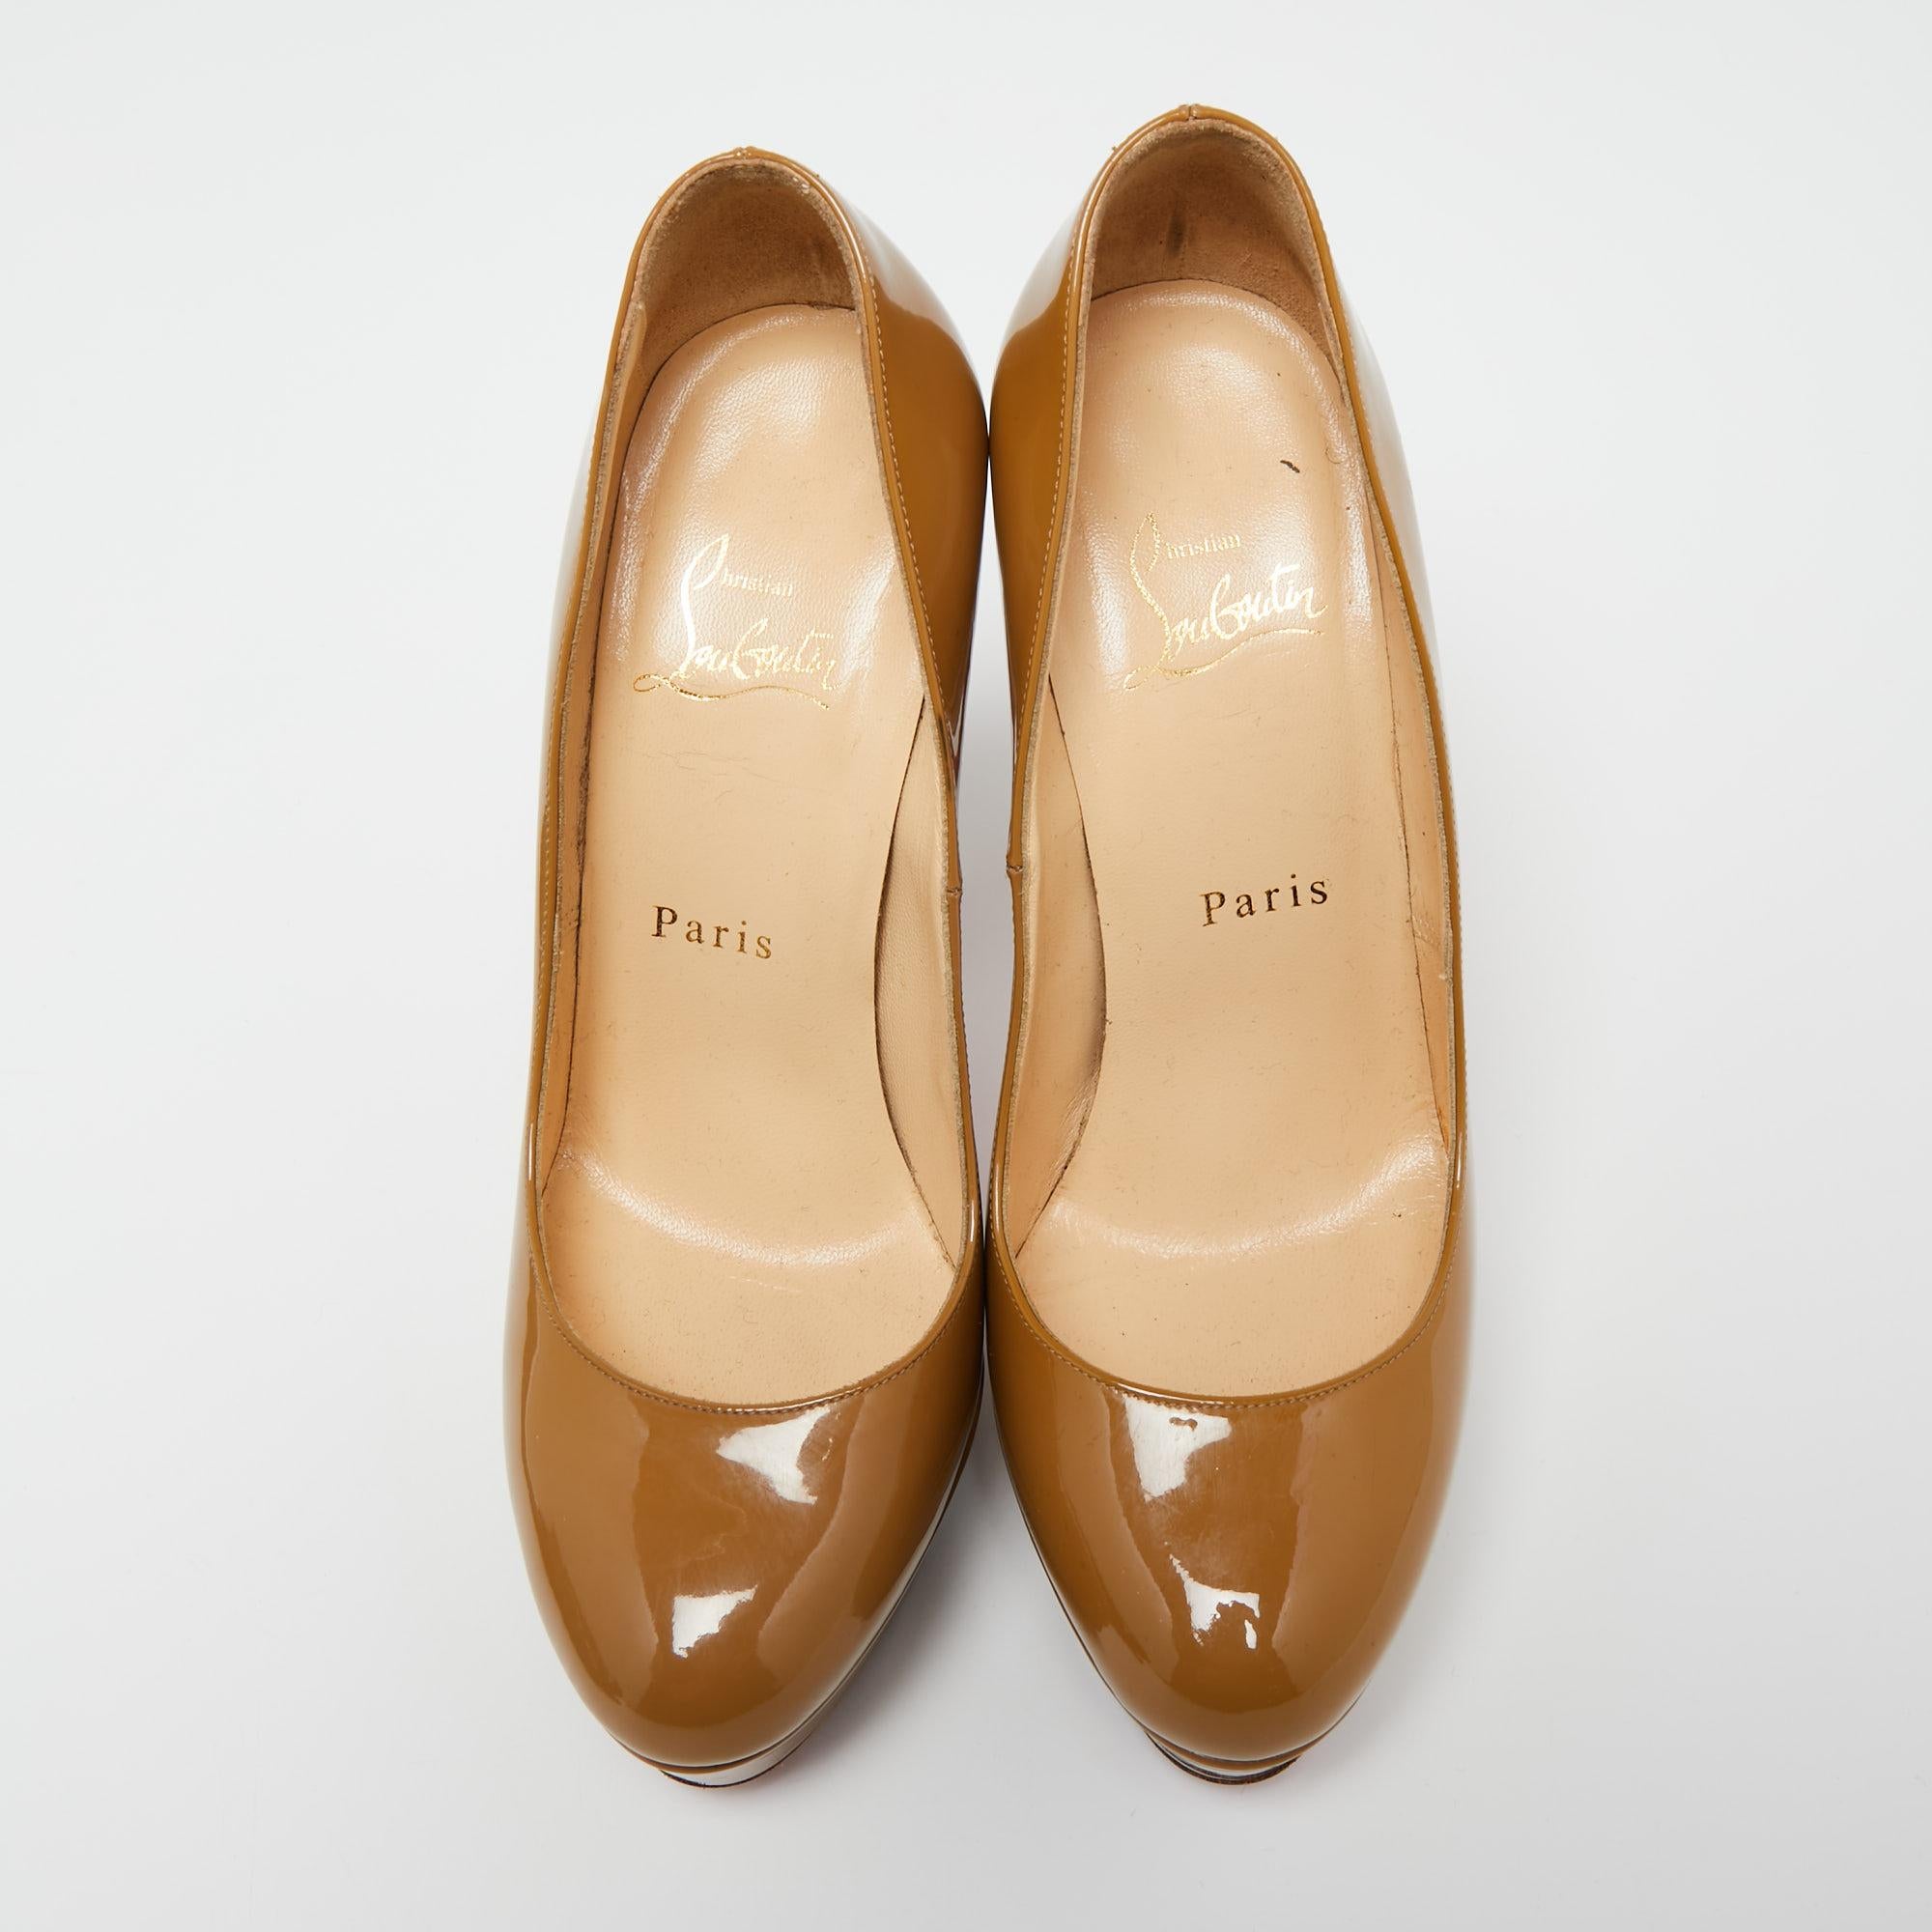 Christian Louboutin Beige Patent Leather Bianca Pumps Size 37 For Sale 1